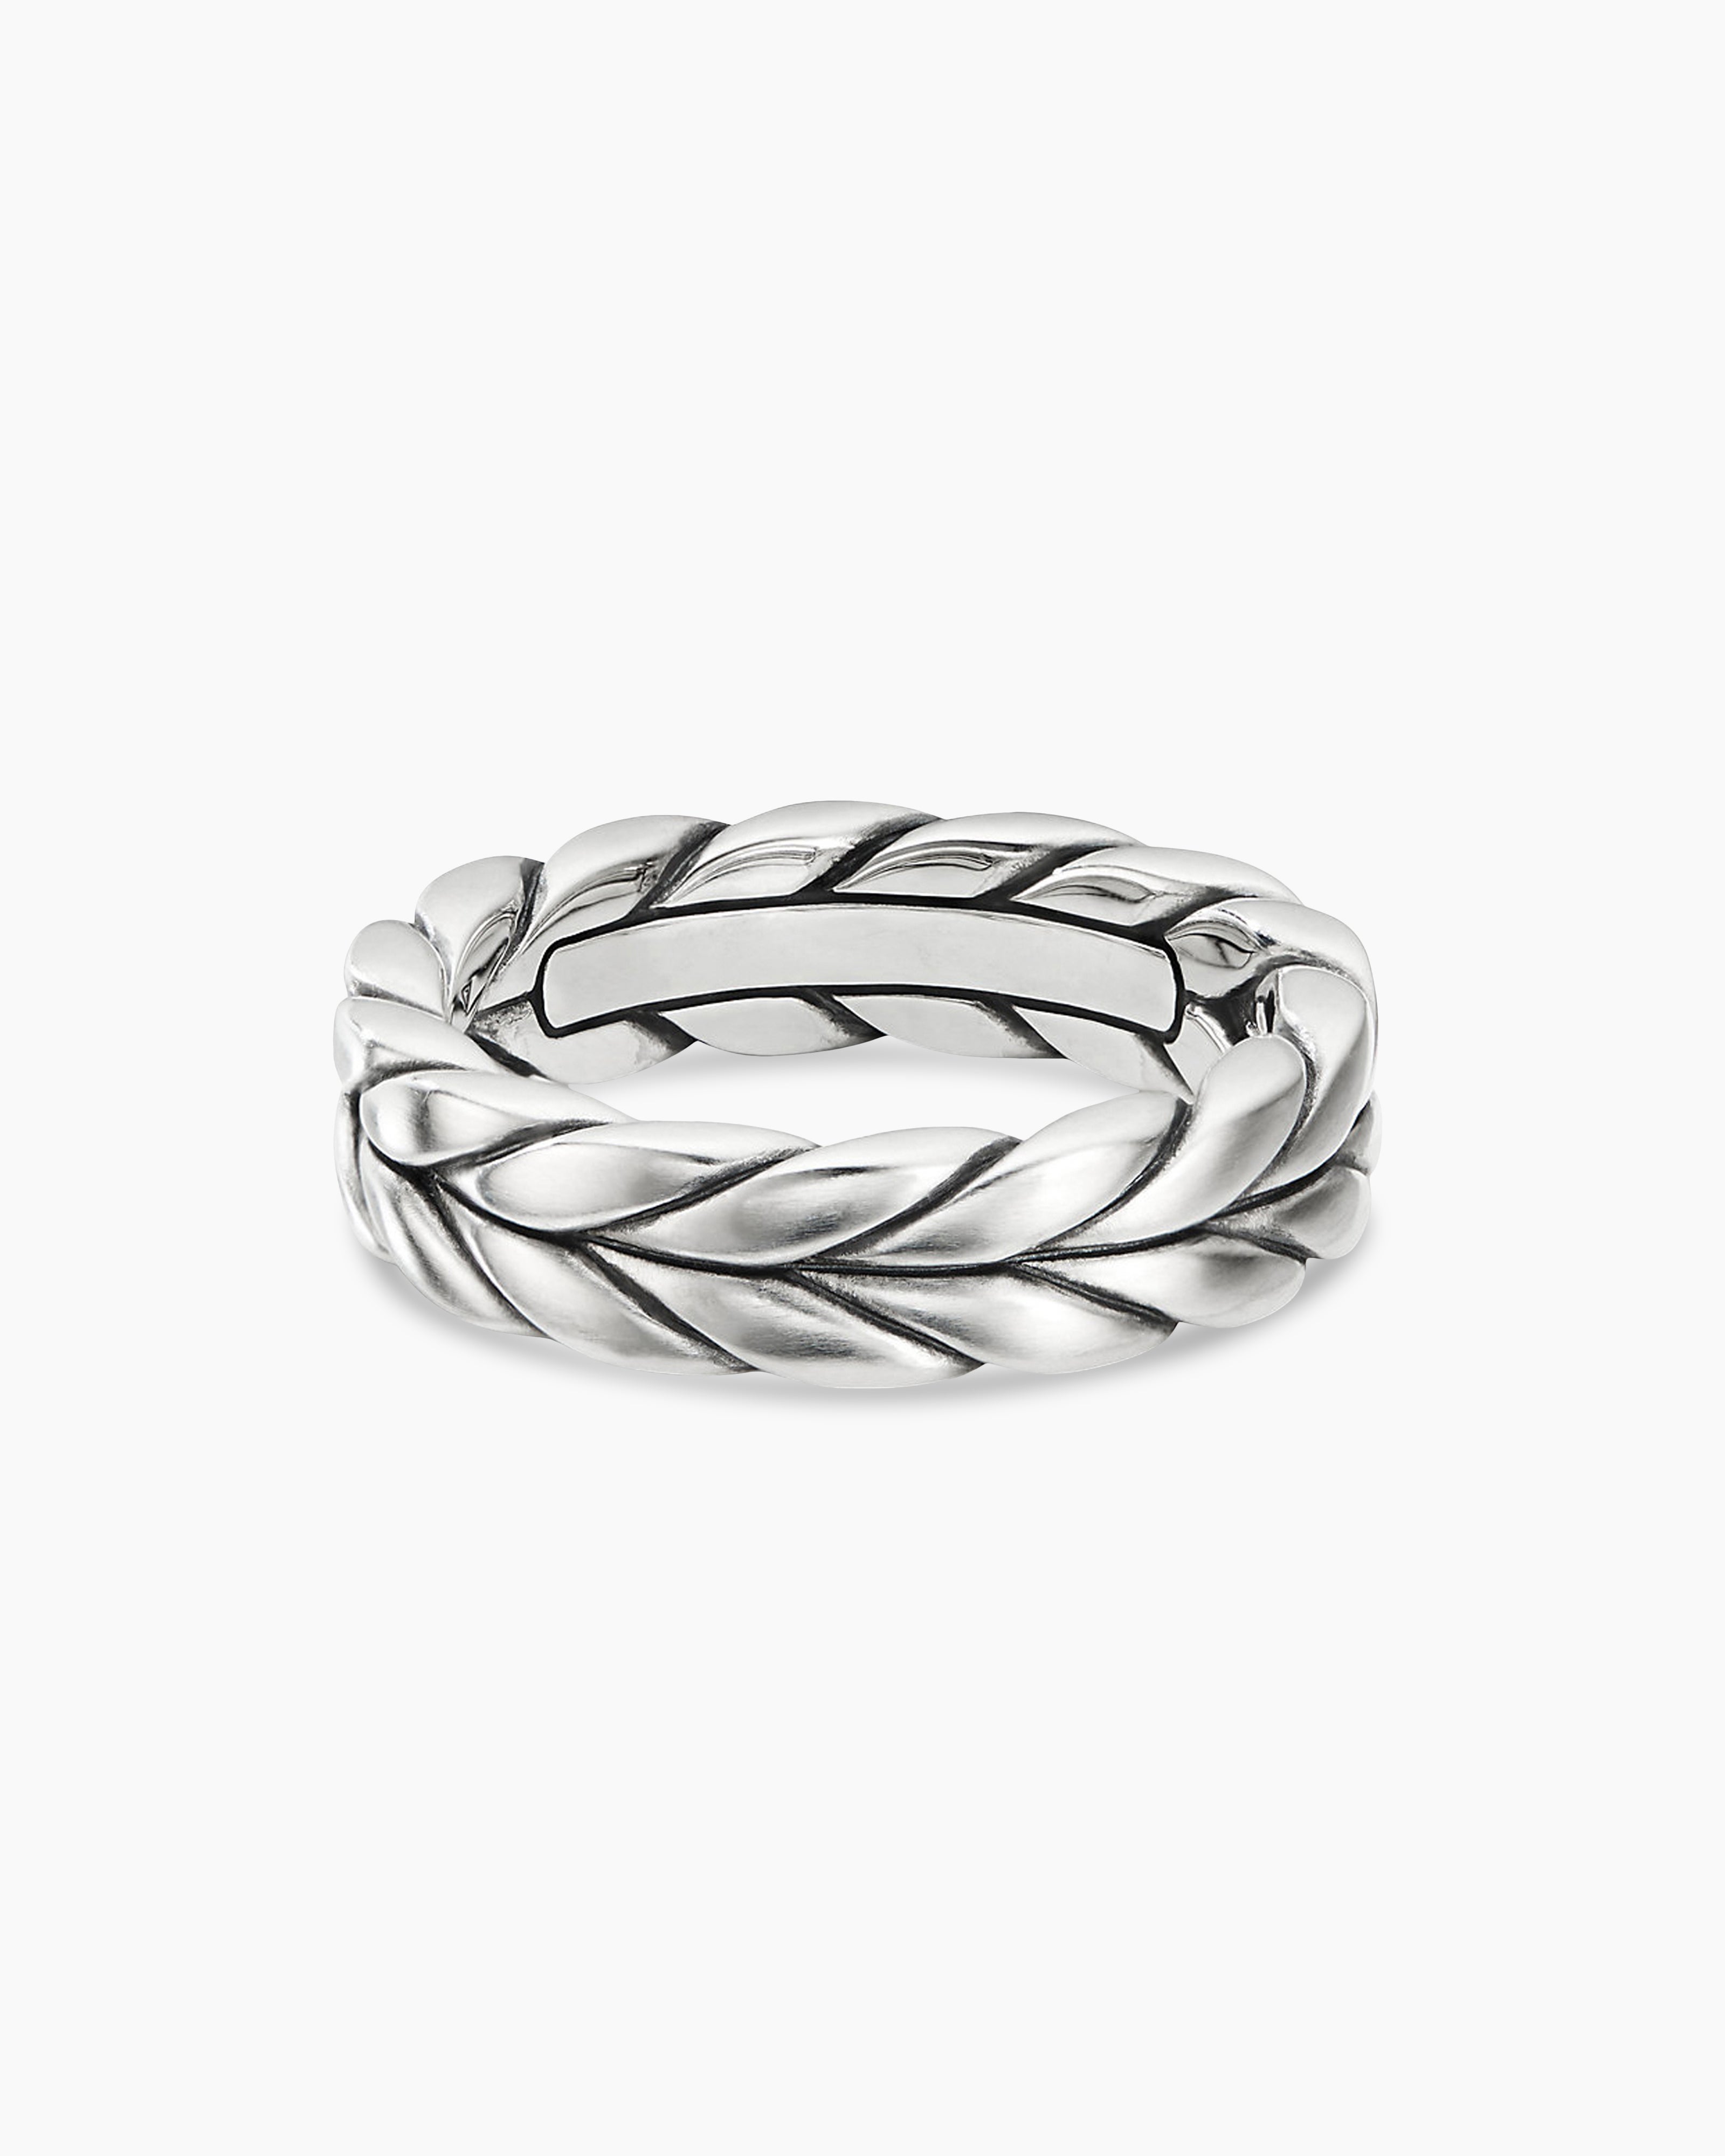 Cable Inset Band Ring in Sterling Silver, 8mm